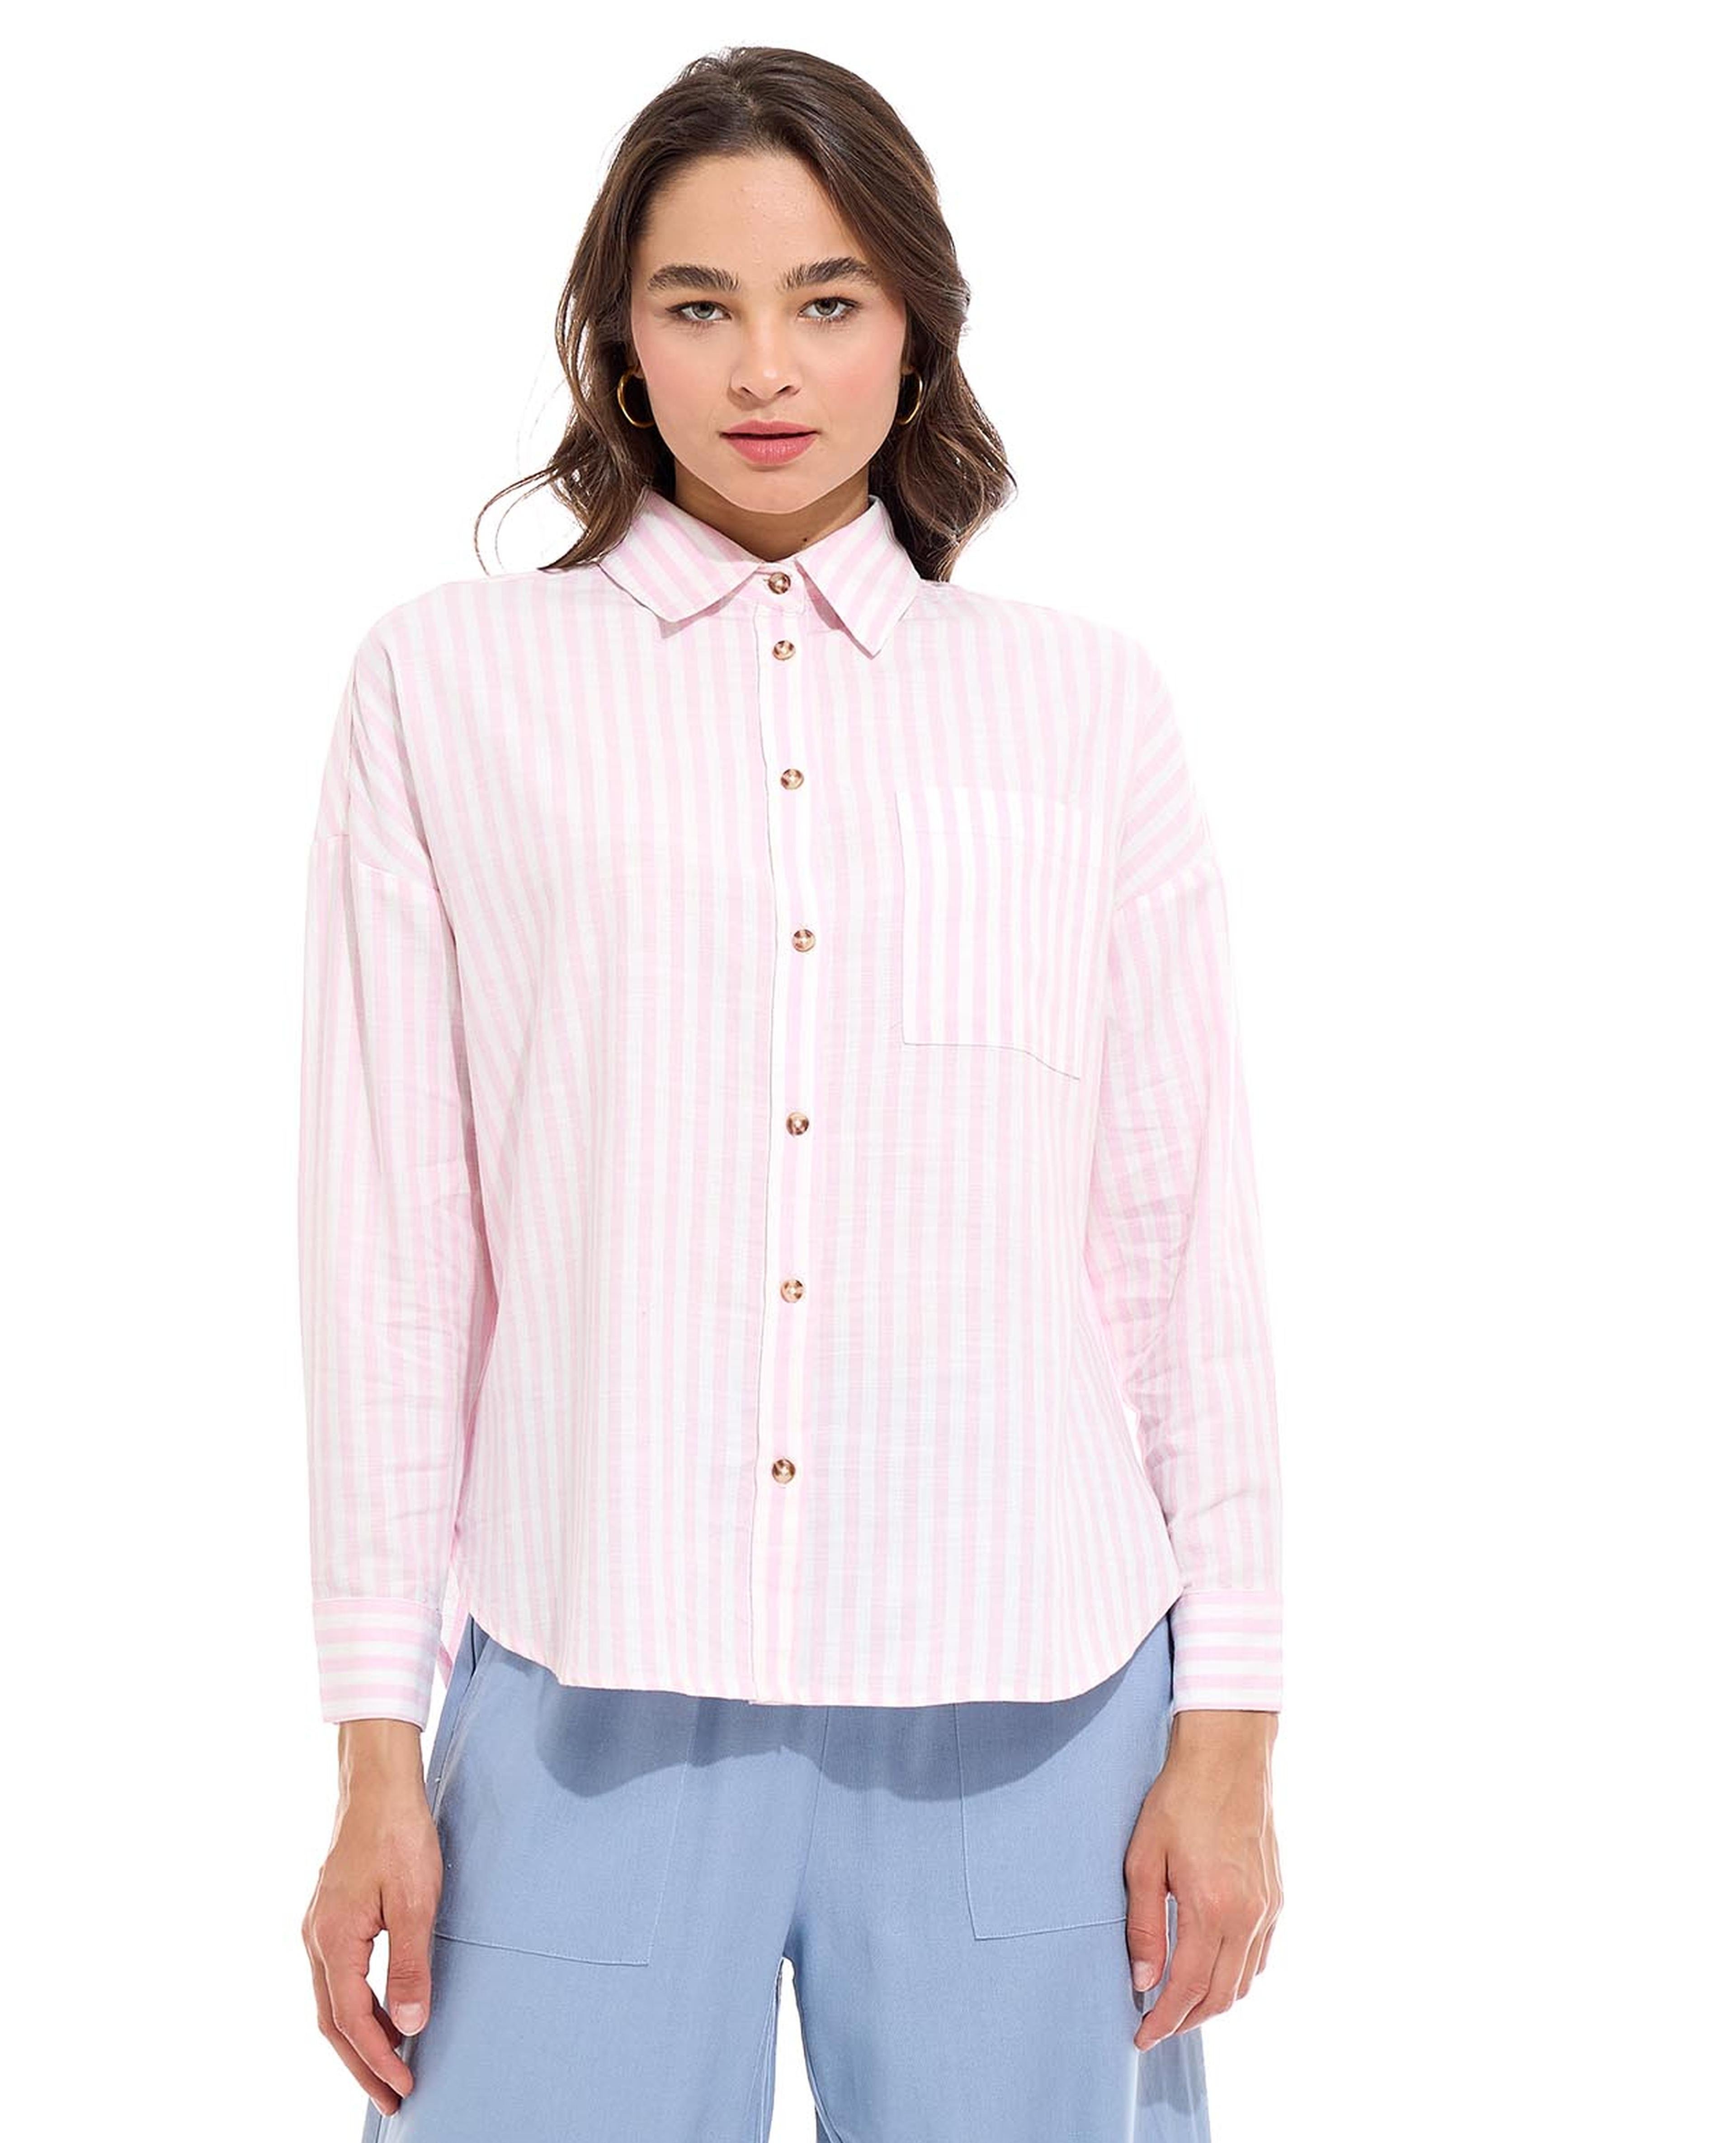 Striped Shirt with Spread Collar  Long Sleeves